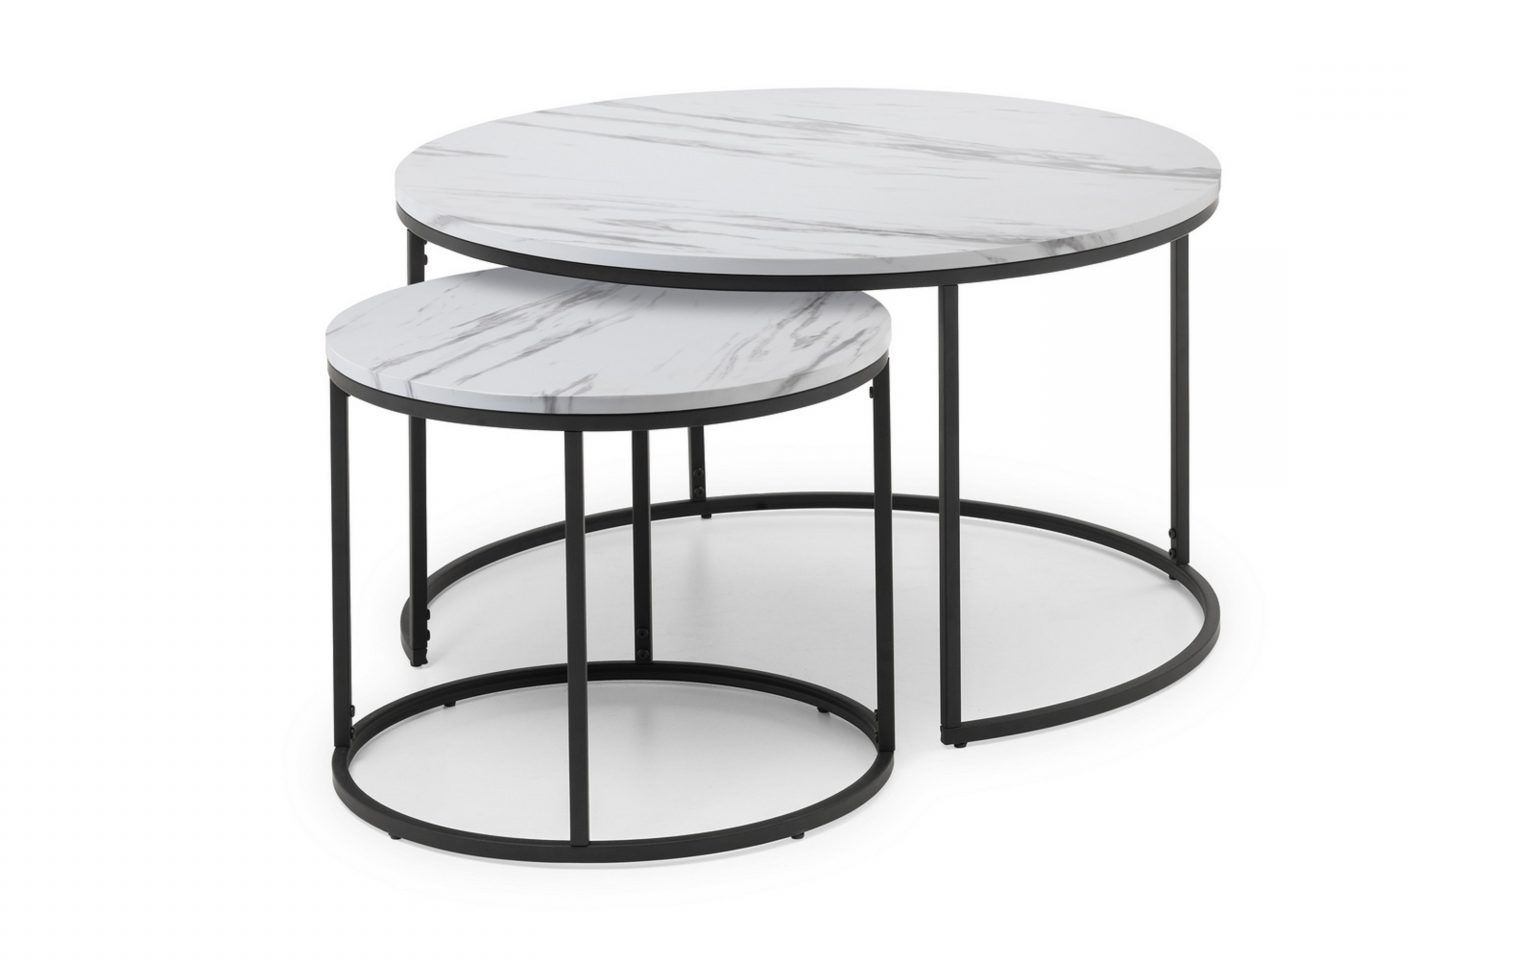 Bellini Round Nesting Coffee Table – White Marble In Most Recent White Stone Coffee Tables (View 3 of 20)